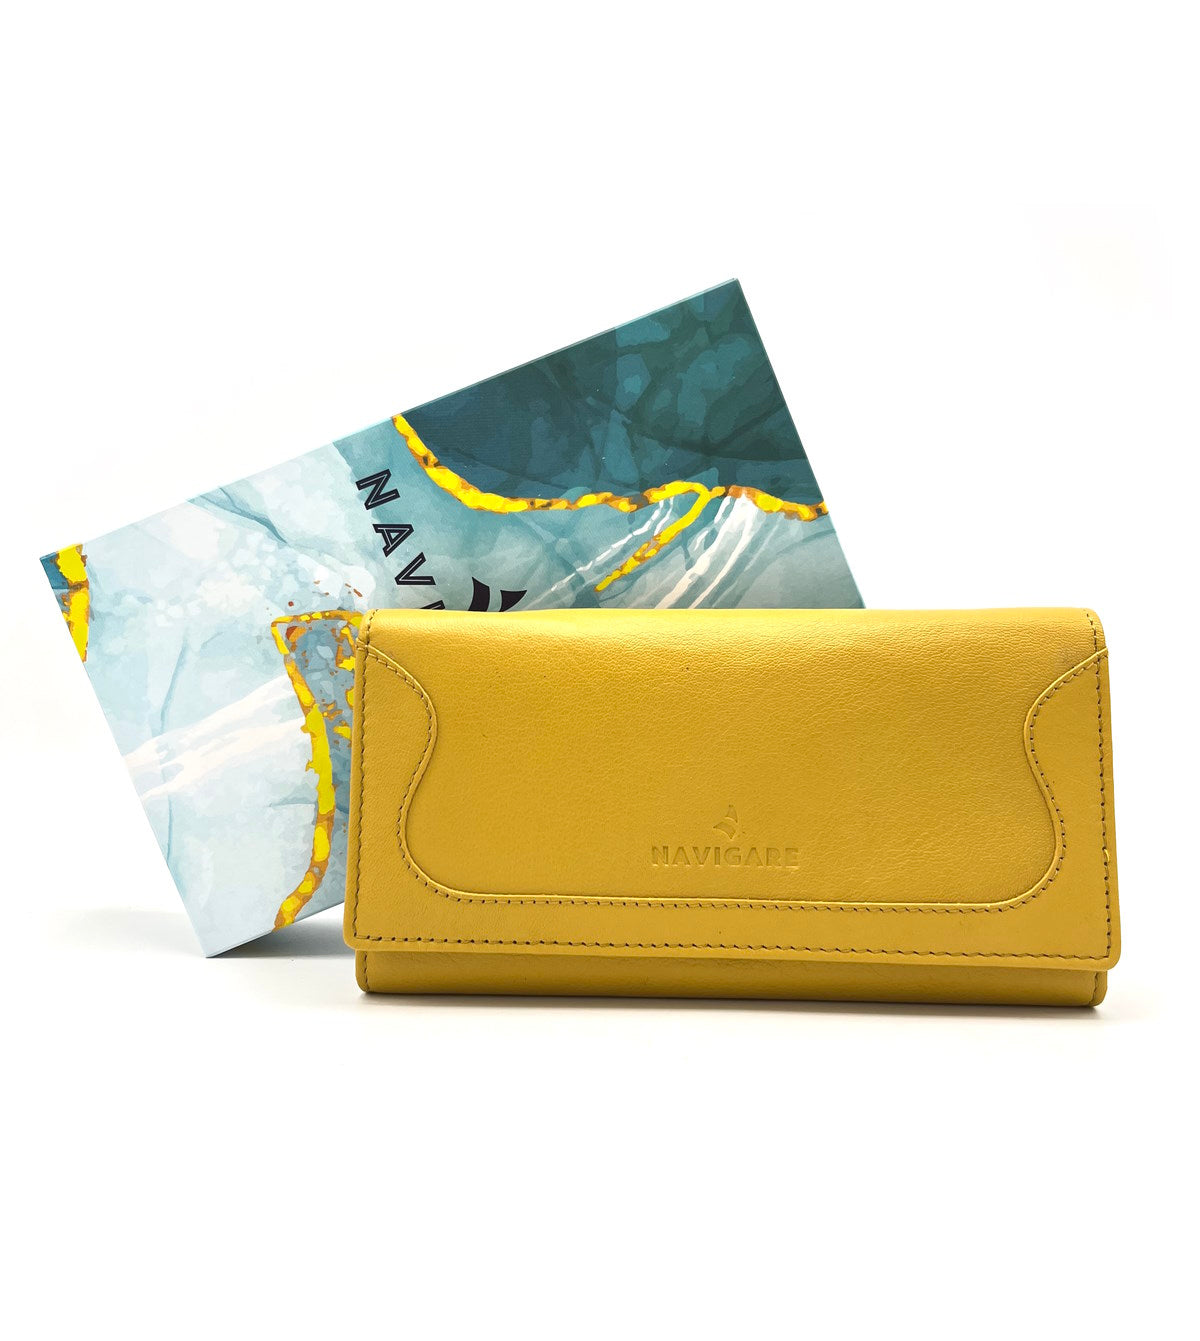 Brand Navigare, Genuine leather wallet, art. PF759-58.062